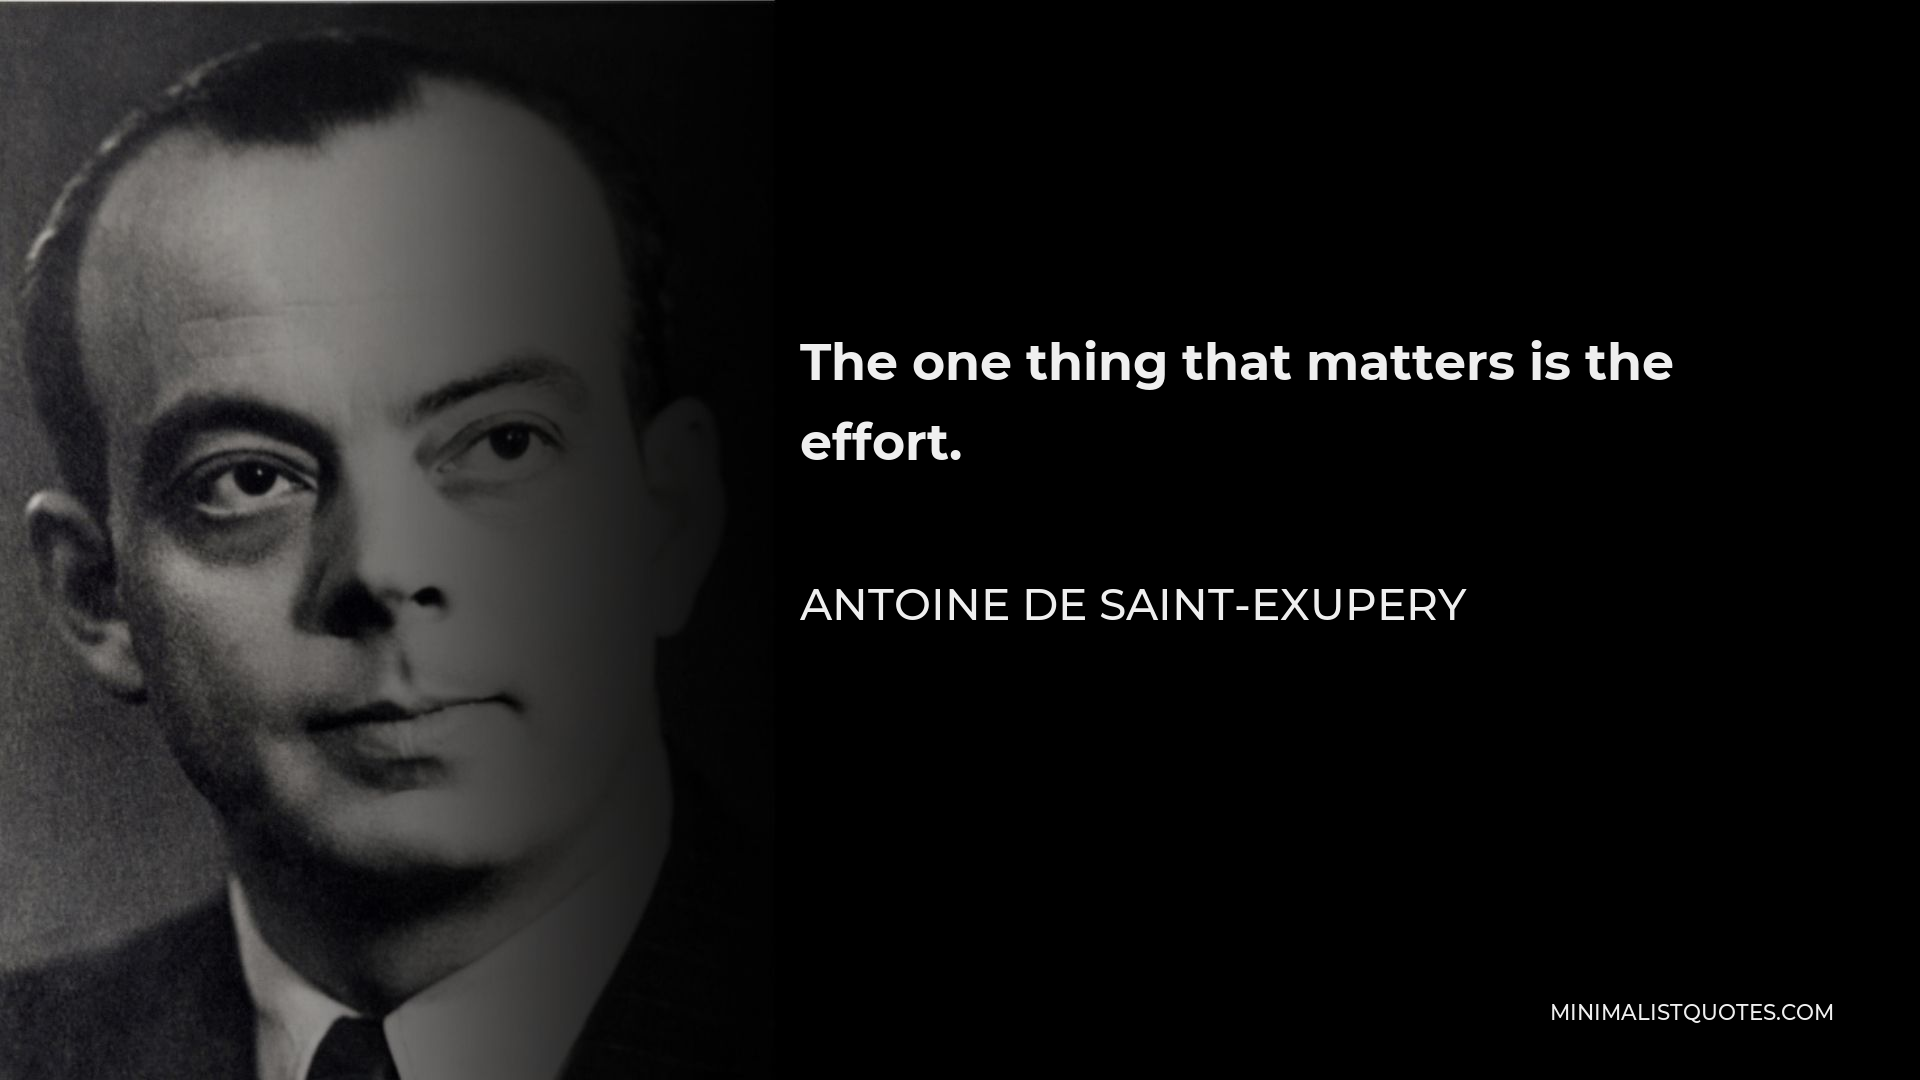 Antoine de Saint-Exupery Quote - The one thing that matters is the effort.